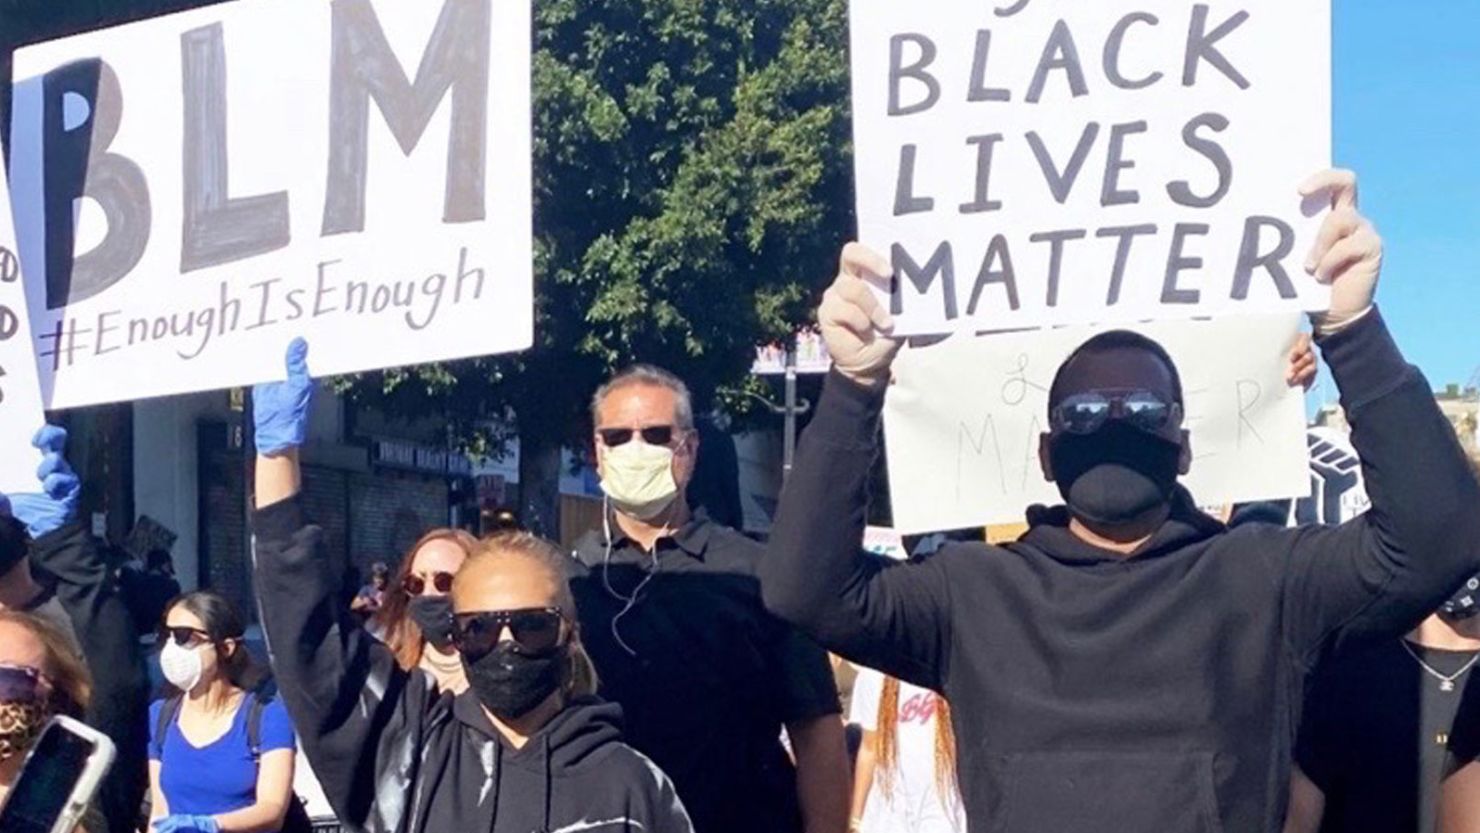 Jennifer Lopez and Alex Rodriguez joined a Black Lives Matter rally in Los Angeles.